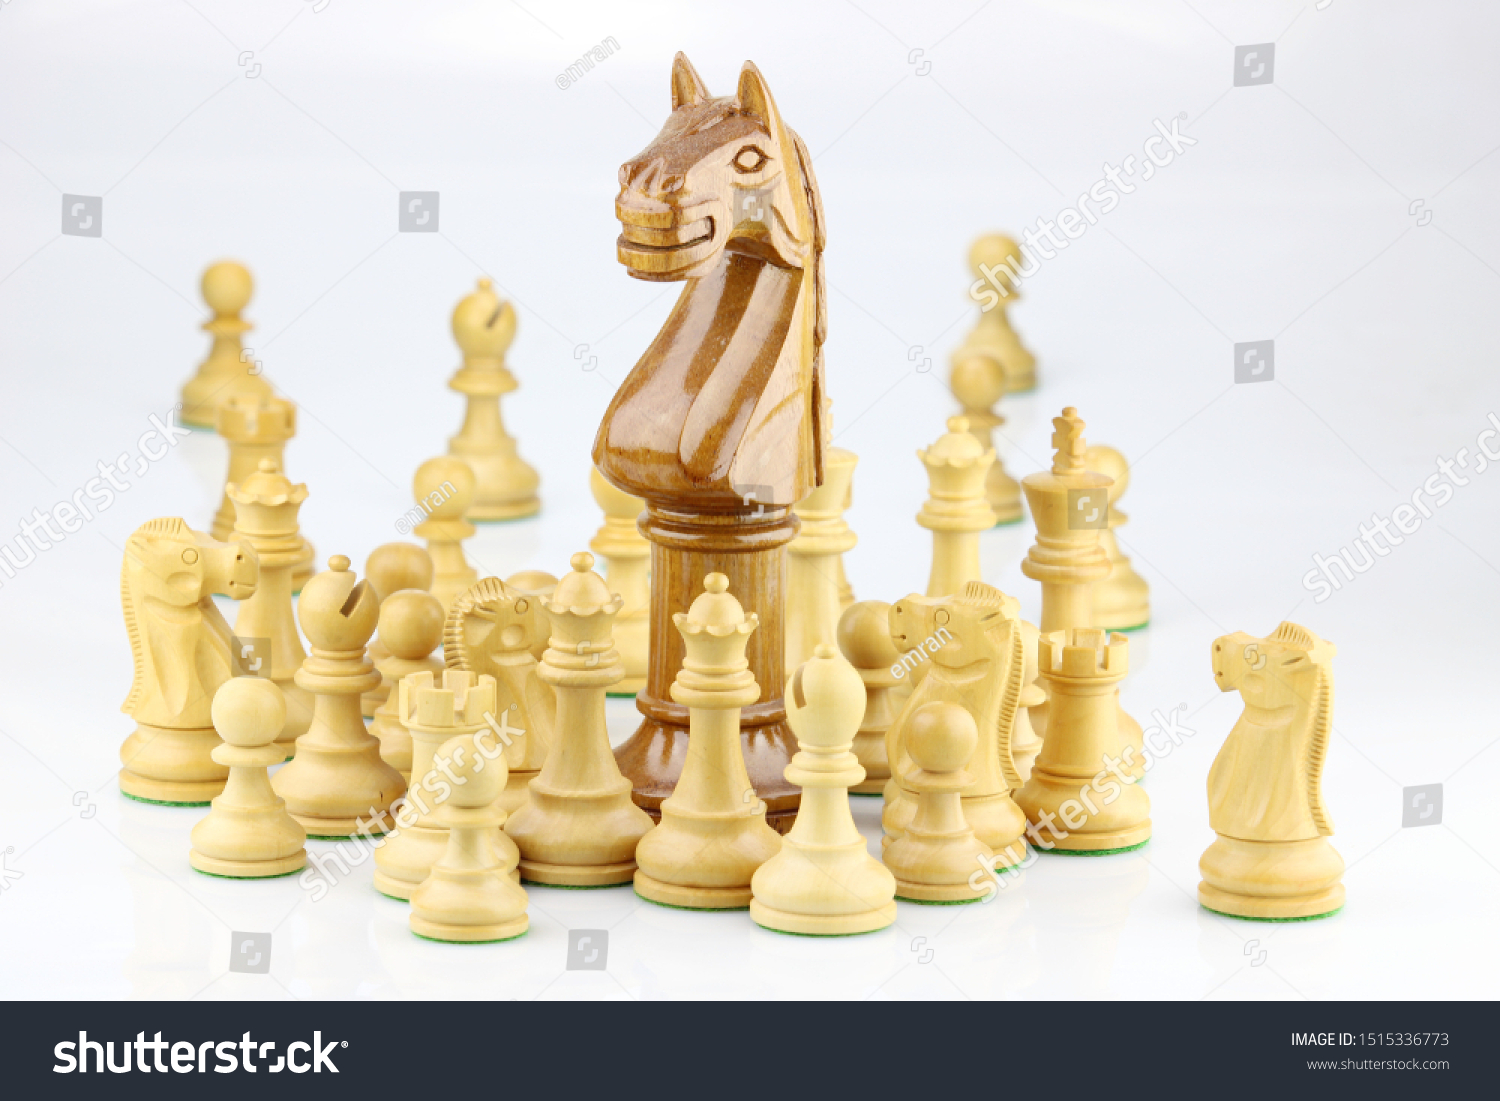 Chess pieces with an outstanding large knight in-focus leading the group that illustrate leadership, unity and teamwork concept #1515336773